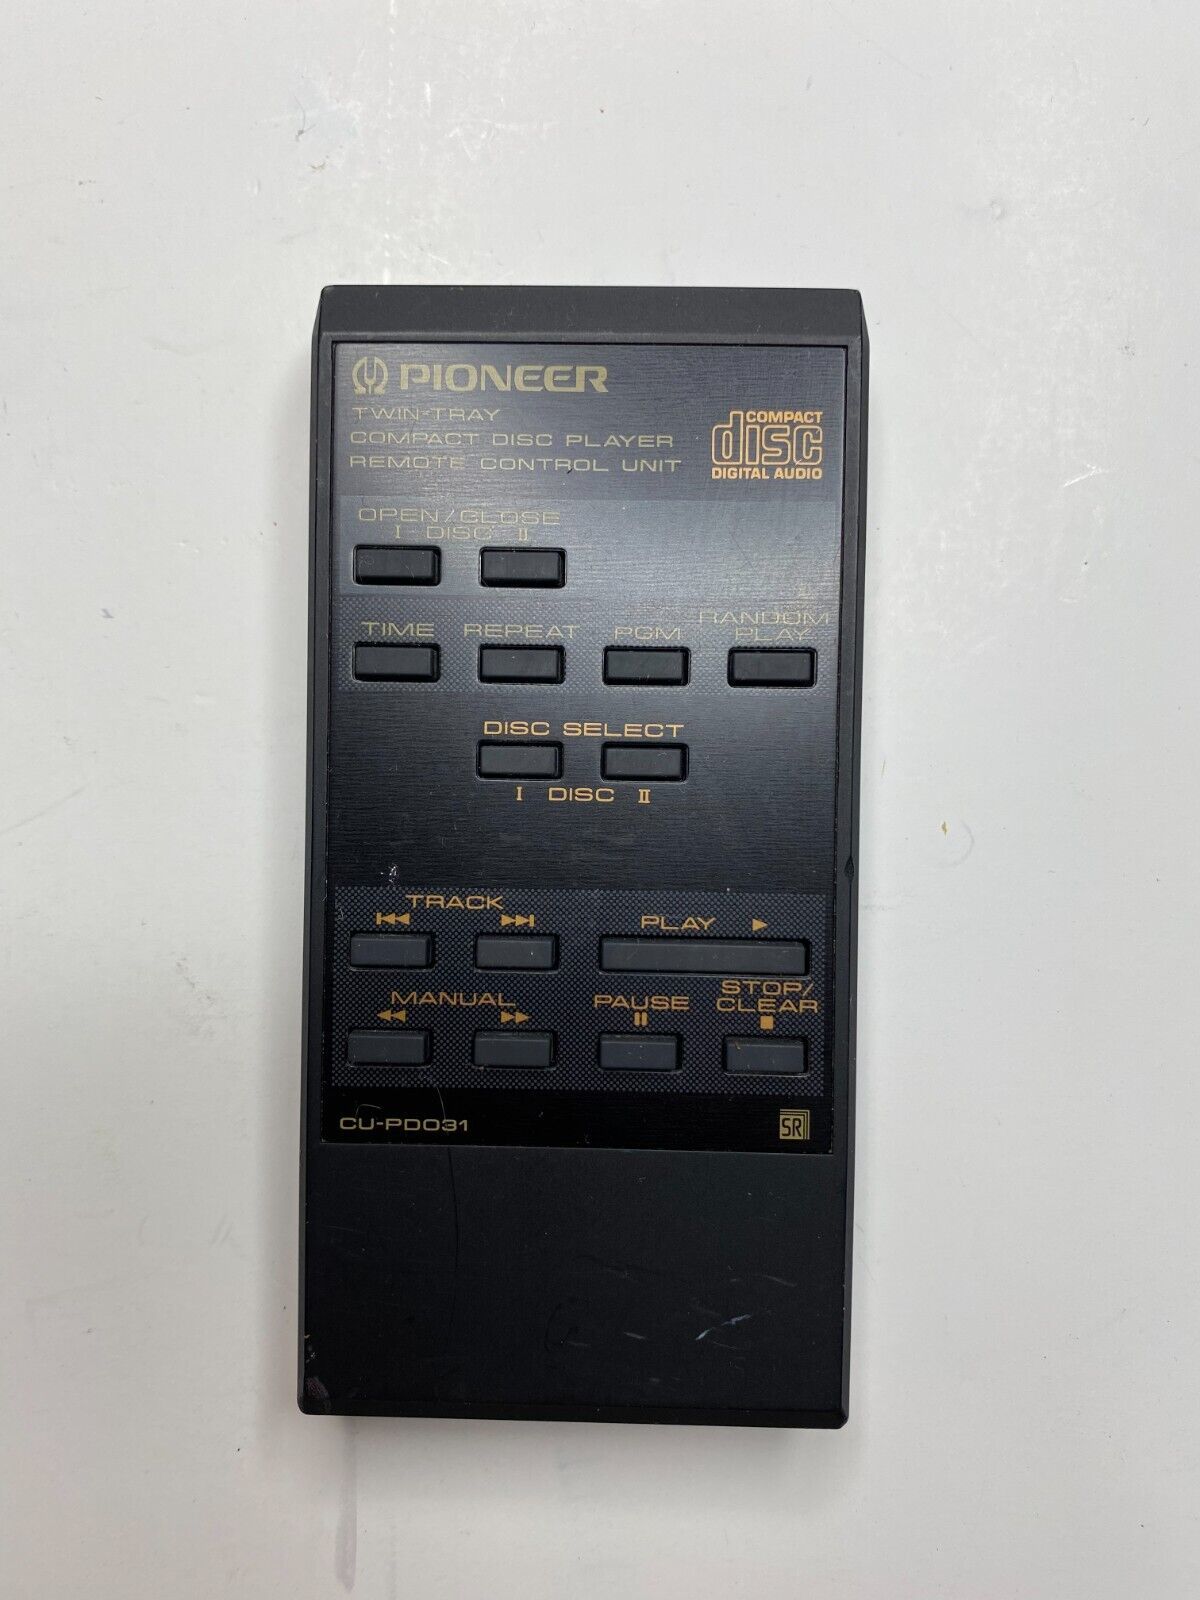 Primary image for Pioneer CU-PD031 Twin Tray 2 CD Player Remote Control, Black - OEM Original